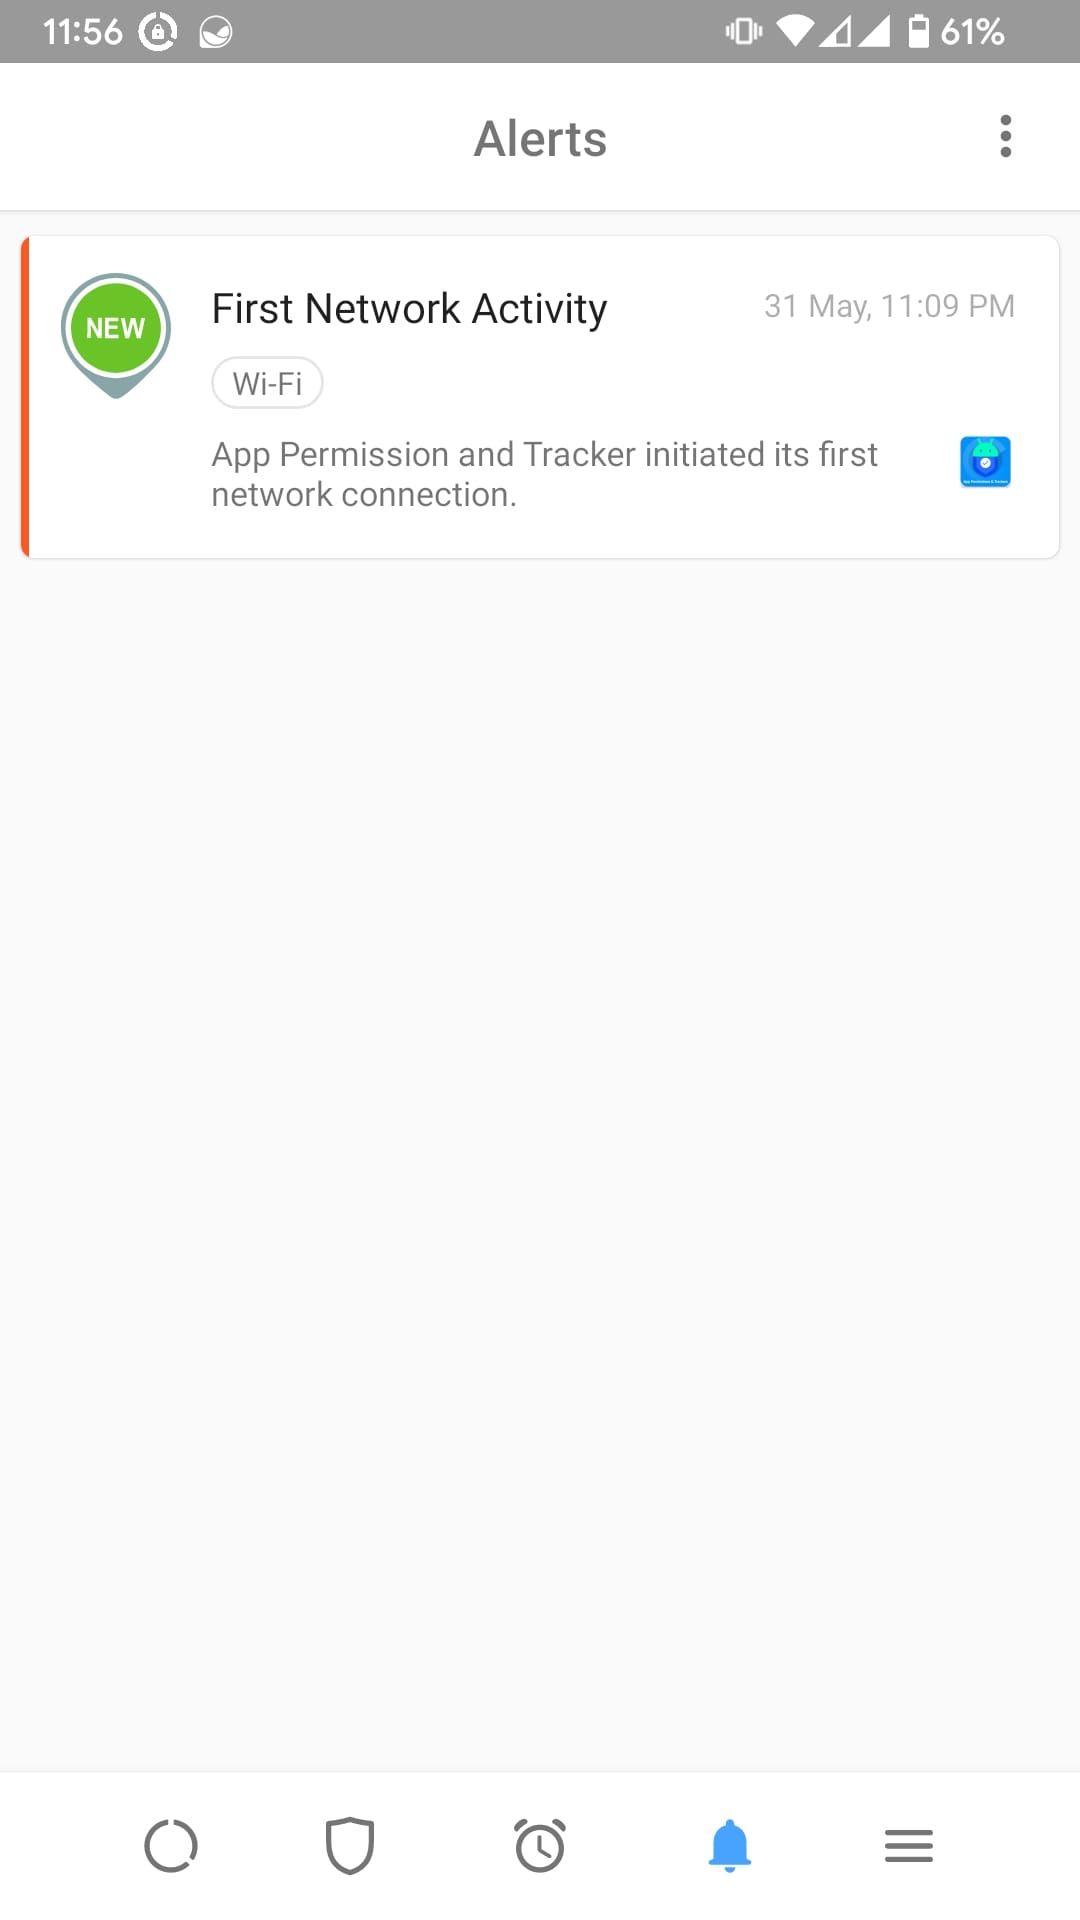 GlassWire Alerts Page shows alerts when an app uses internet